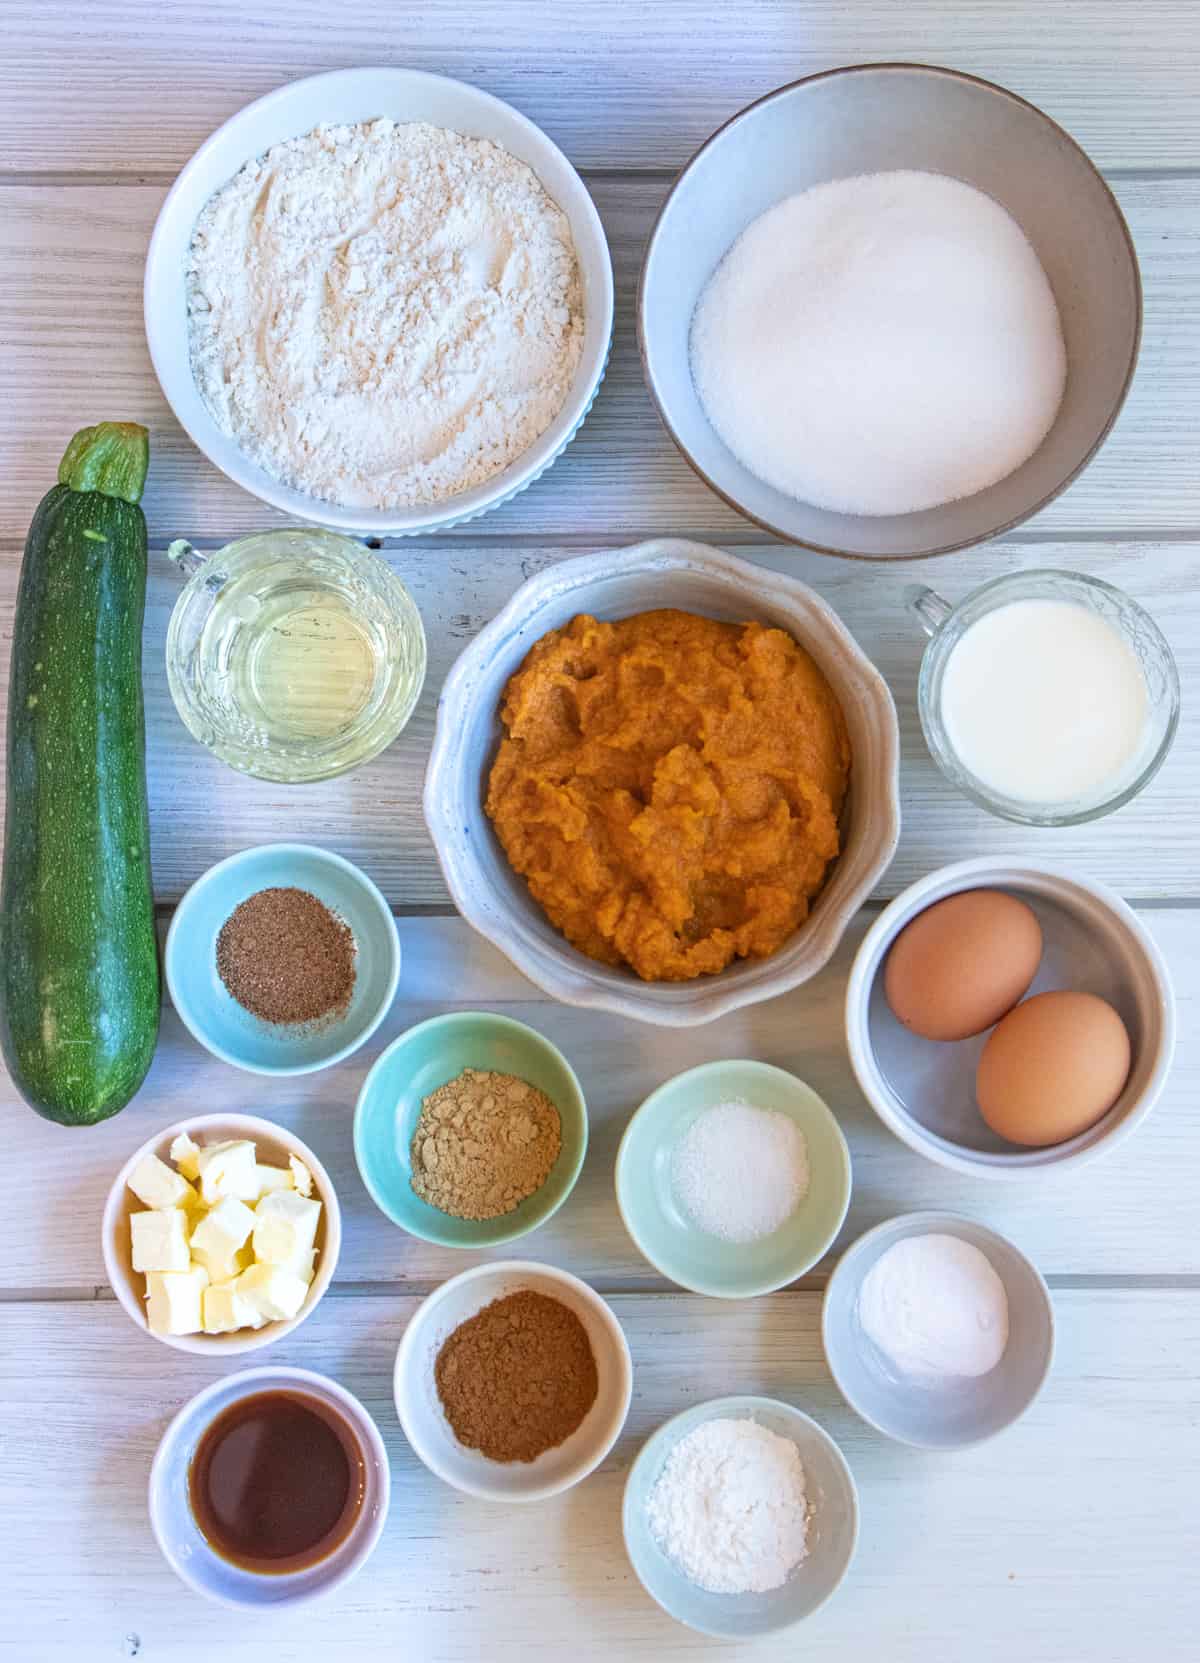 Ingredients for pumpkin zucchini muffins on a board.